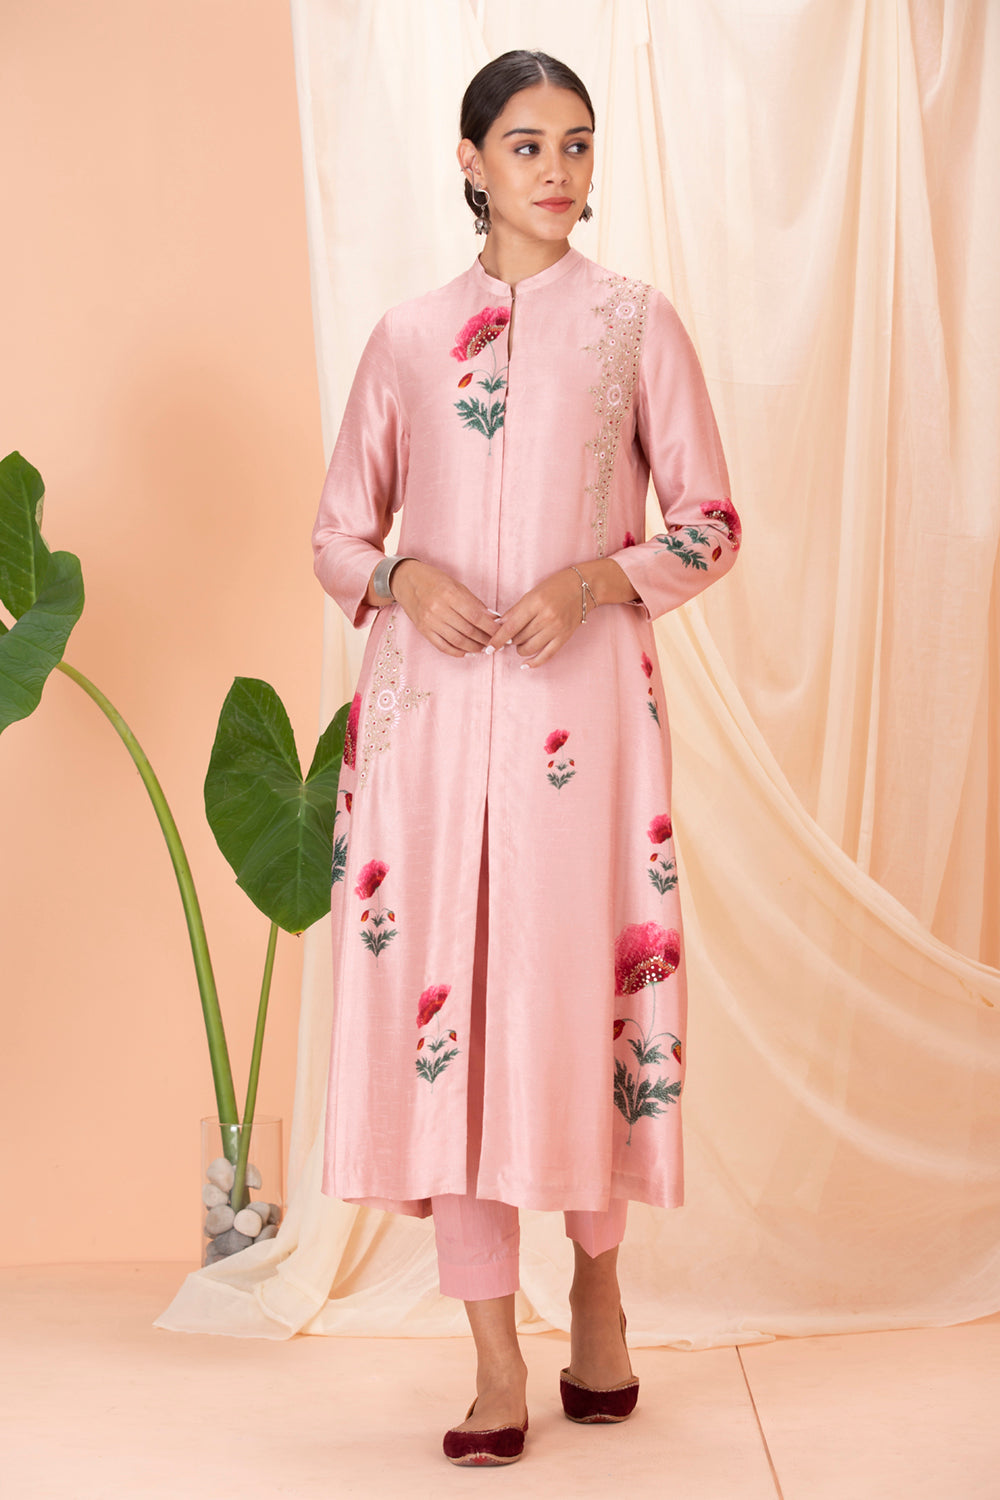 Maharani Pink Embroidered Kurti With Straight Pants Couple Matching Dress  at Rs 4799.00 | Chikan Embroidery Kurti, चिकन कुर्ती - Anokherang  Collections OPC Private Limited, Delhi | ID: 2849557429391